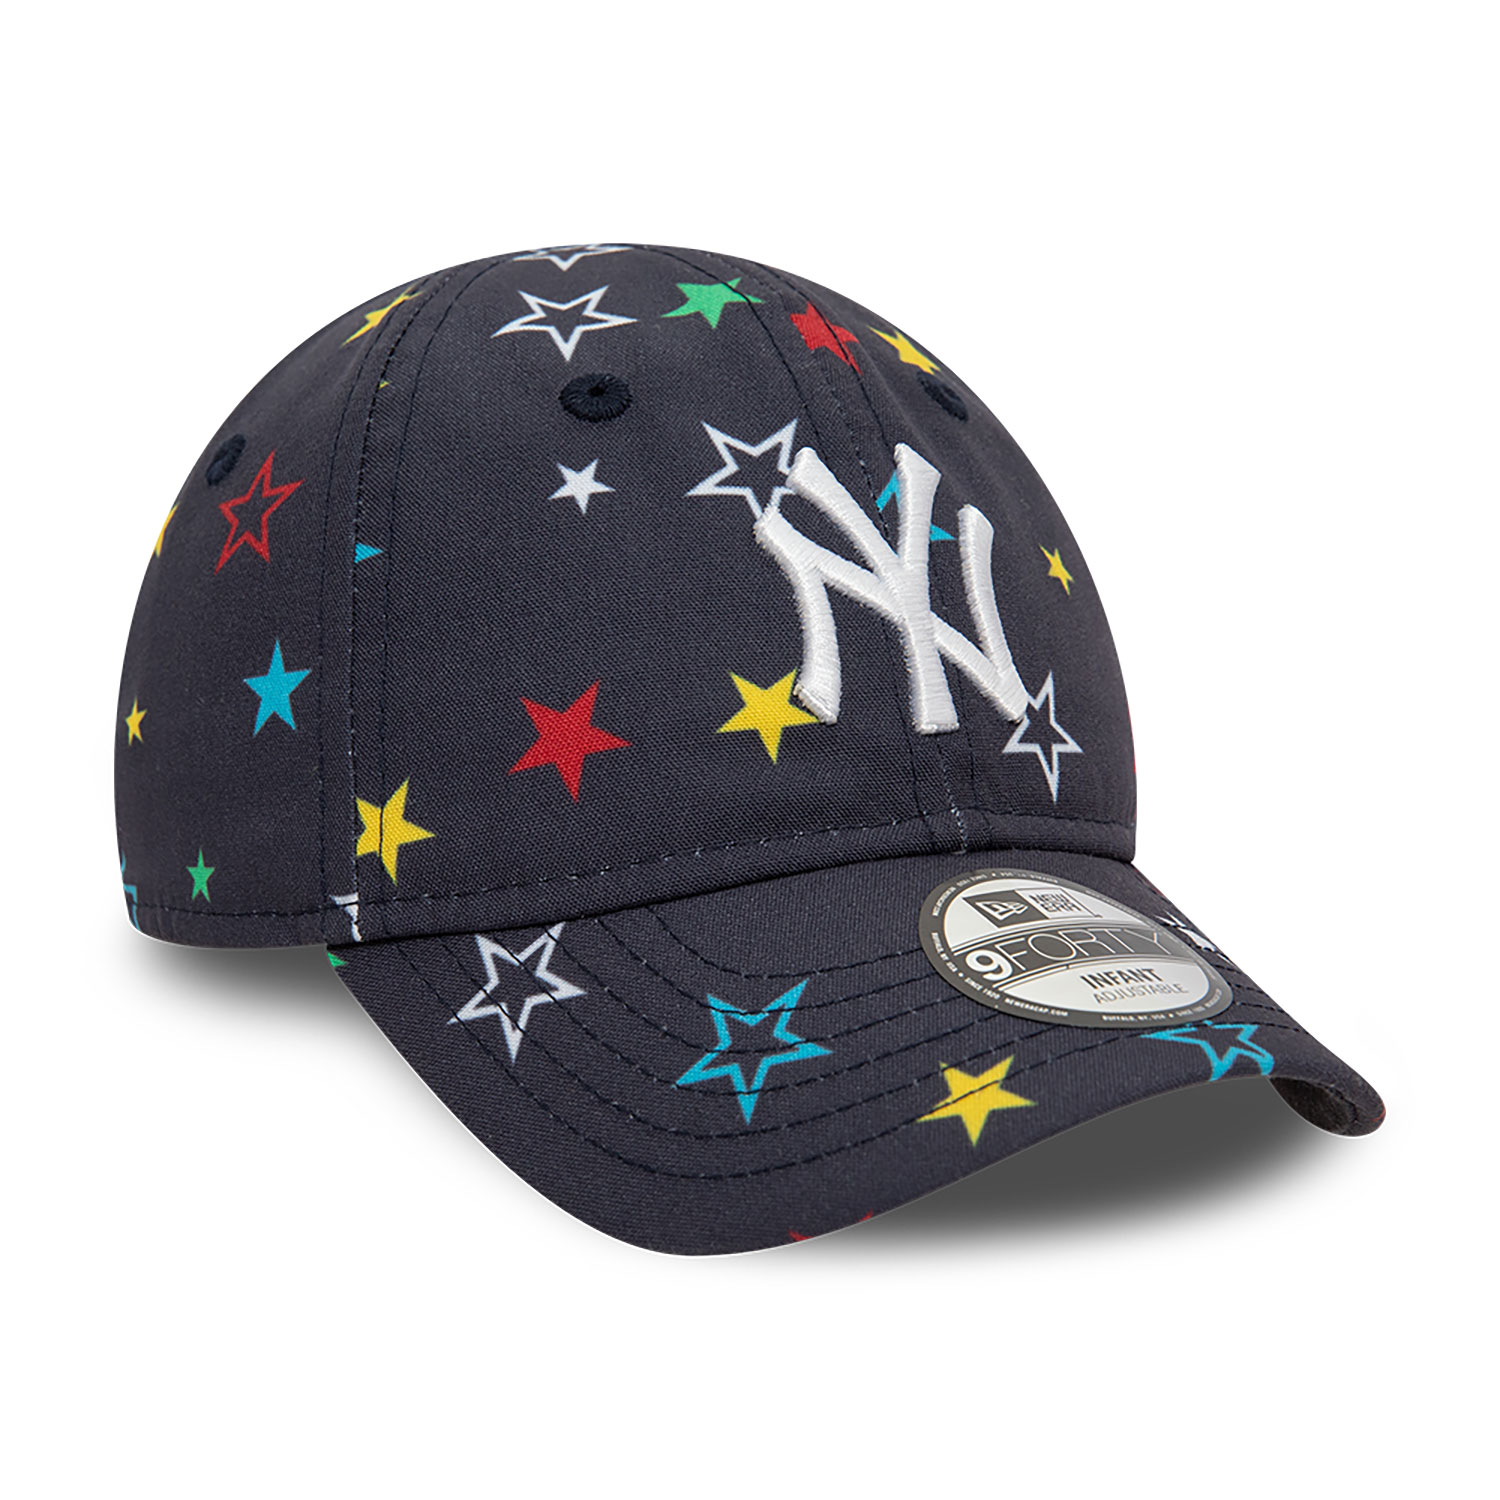 New York Yankees Infant All Over Print Navy 9FORTY Adjustable Cap